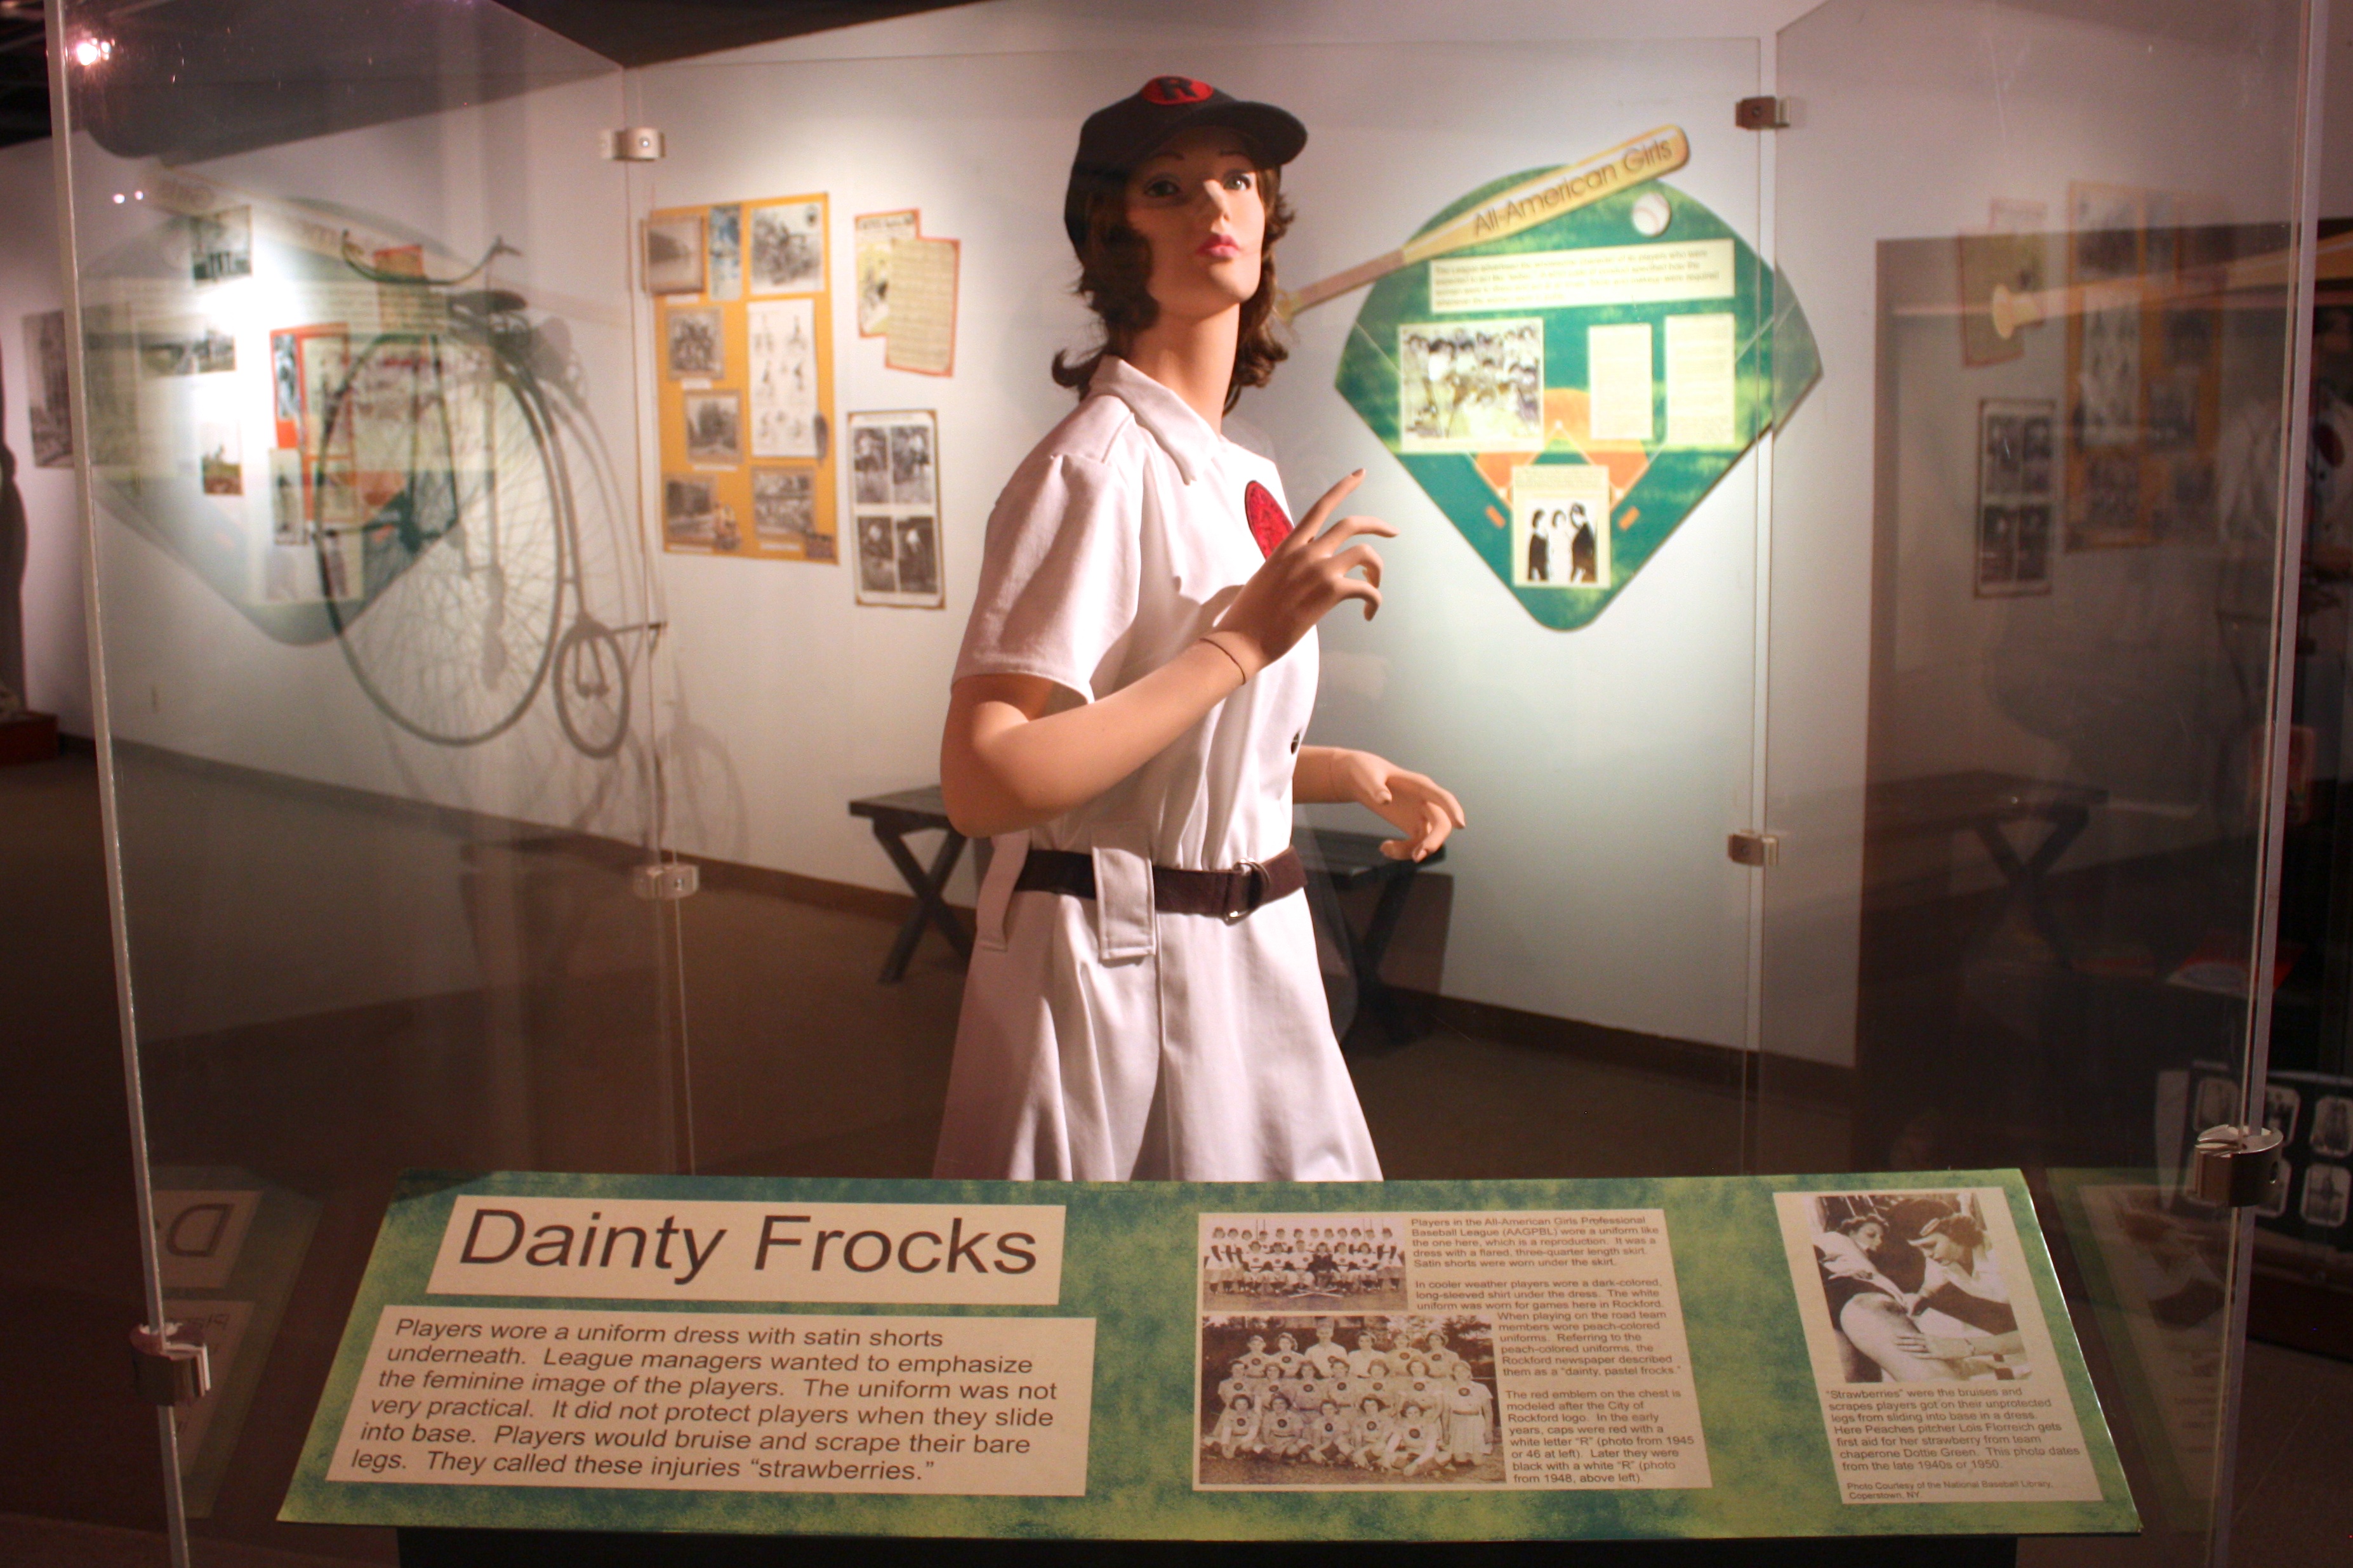 rockford peaches players